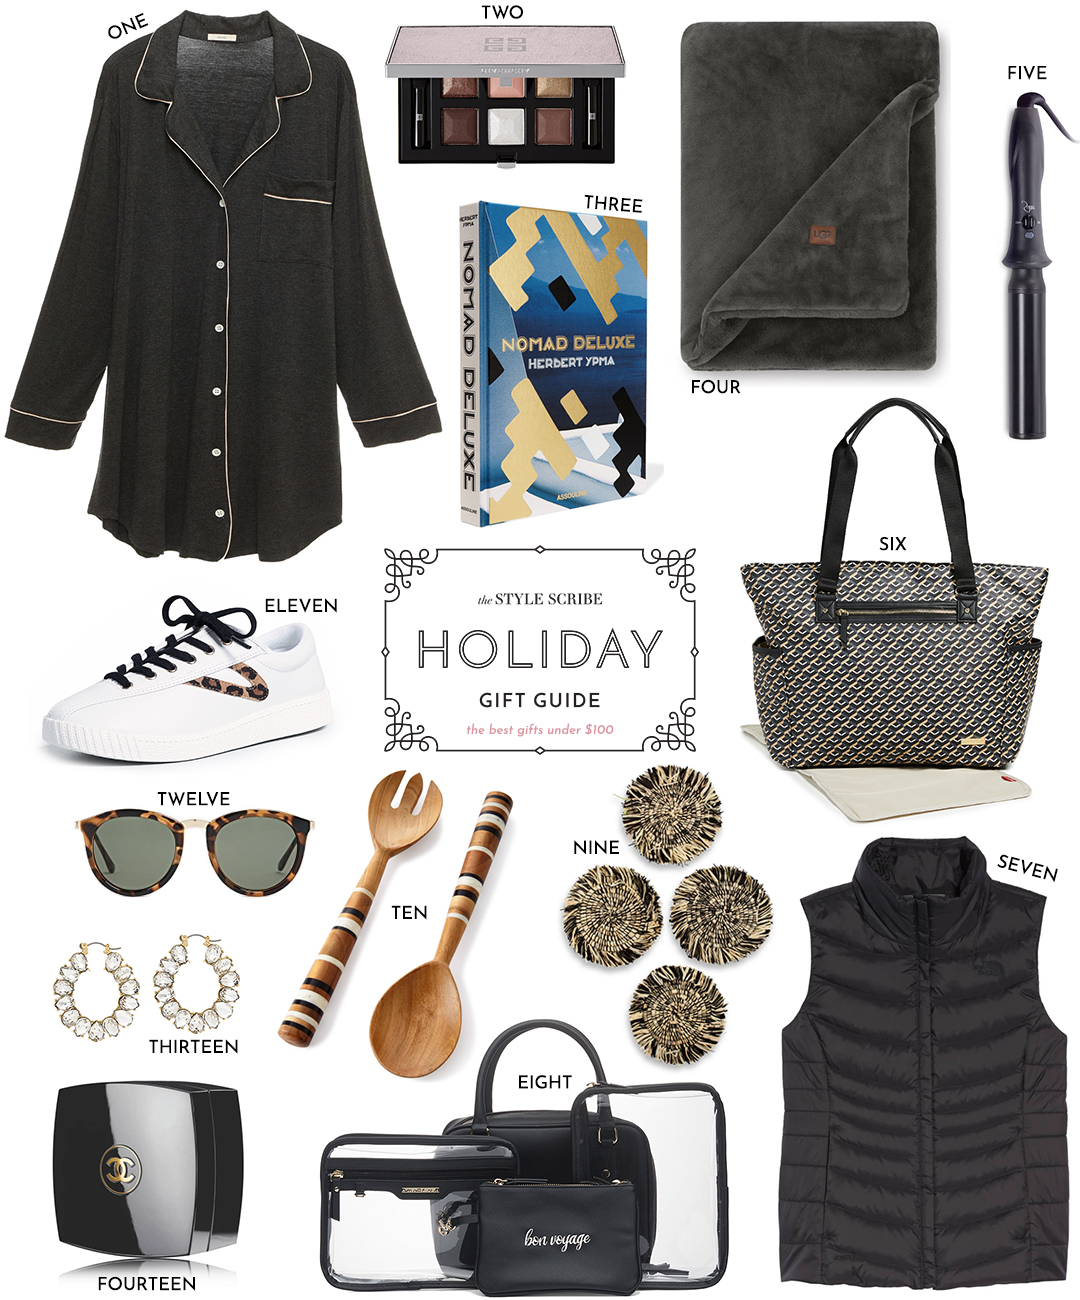 HOLIDAY GIFT GUIDE // BEST GIFTS FOR HER UNDER $100